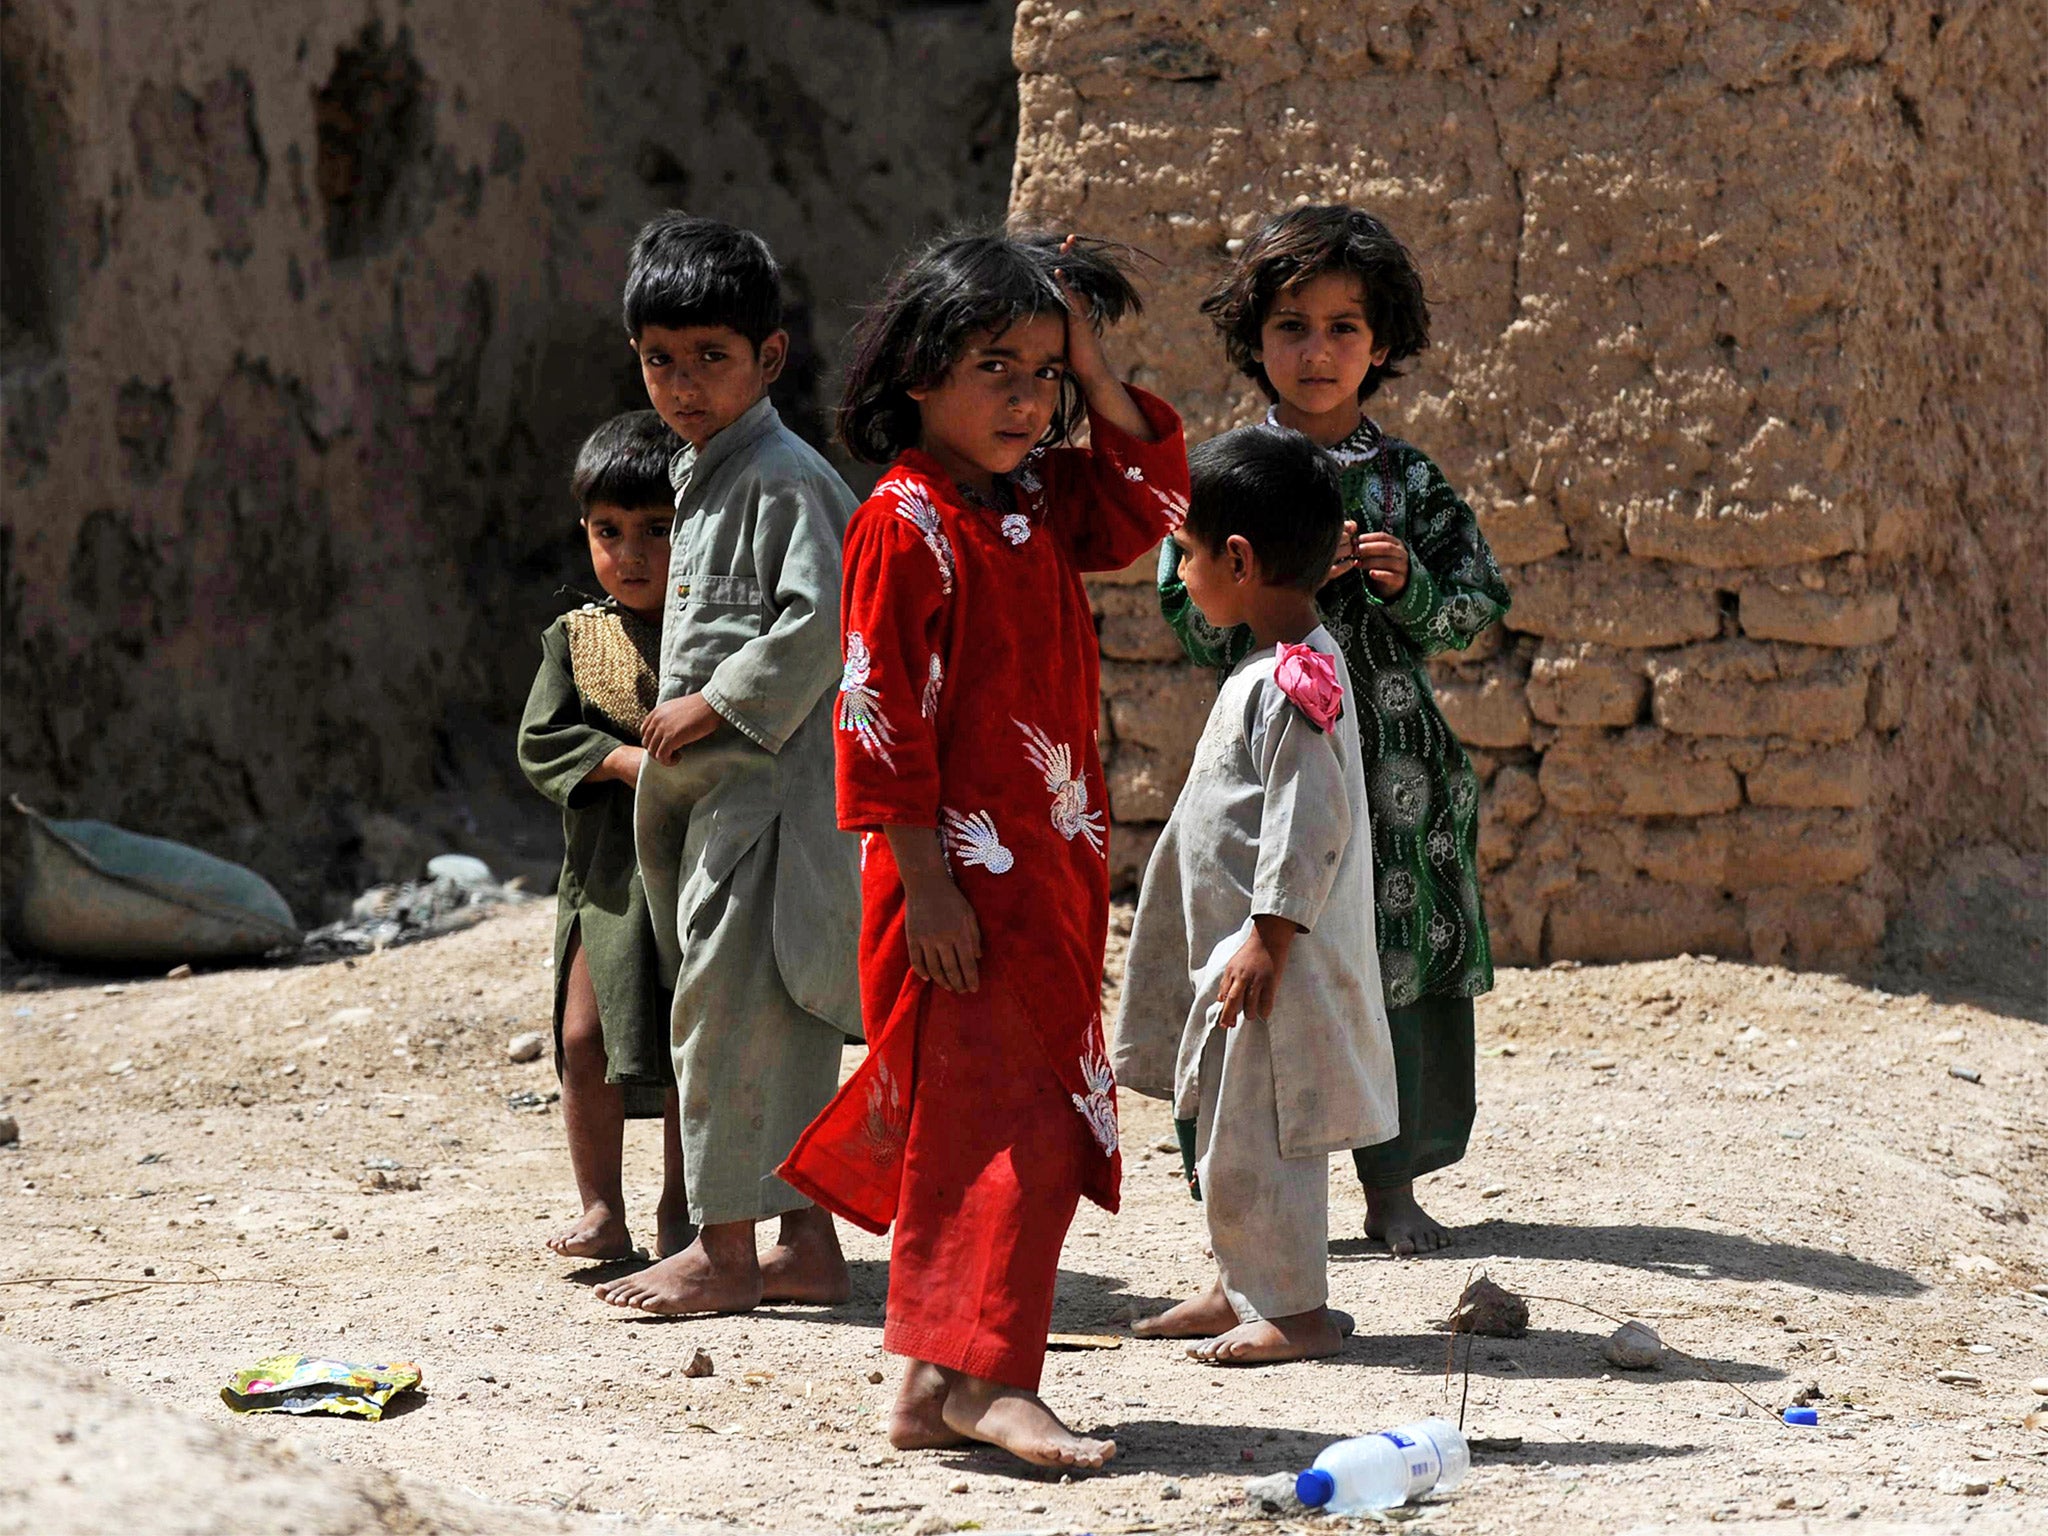 Children in Helmand province, Afghanistan. Some children deported from Britain claim they had
been left homeless, chased by the Taliban, kidnapped, ransomed and beaten